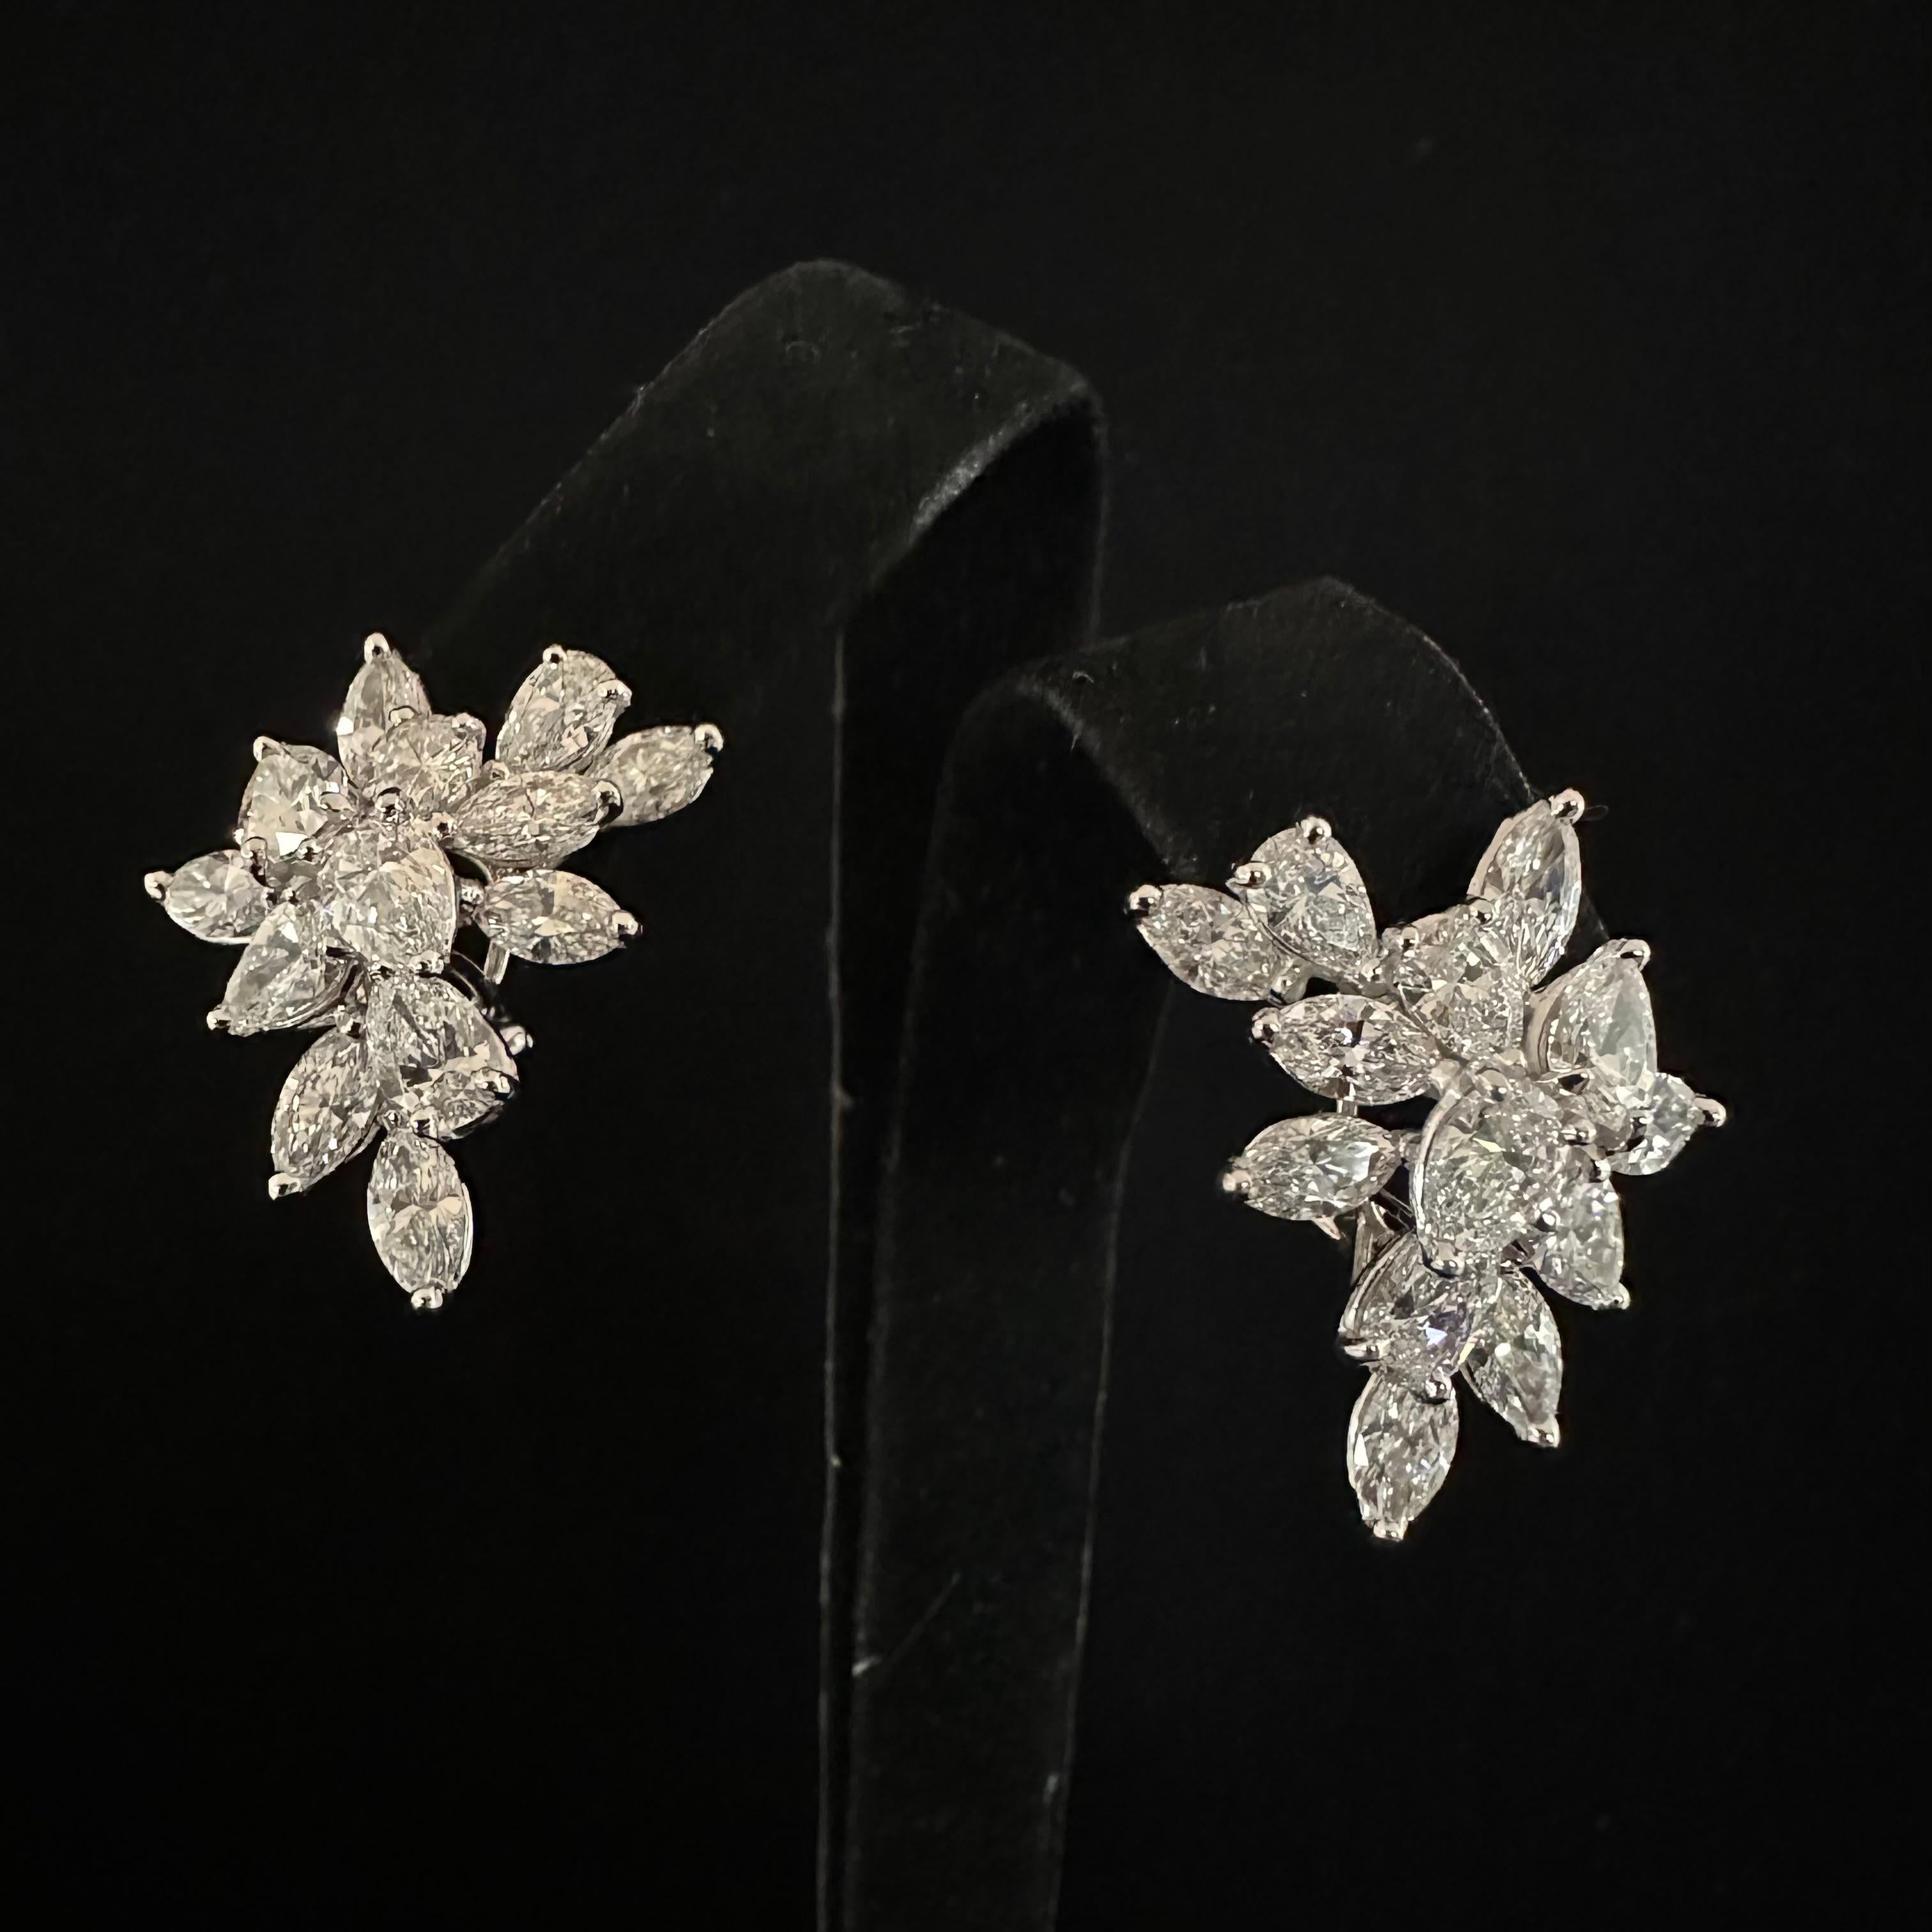 Oscar Heyman 
Platinum Hand Made Cluster Earrings
Containing 
12 Pear Shape Diamonds
14 Marquise Shaped Diamonds
Total Weight 10.35 cts.
Fine quality G - VVS 
Hallmarks: 702744
The Earrings have lever Backs and can be adjusted for a post if